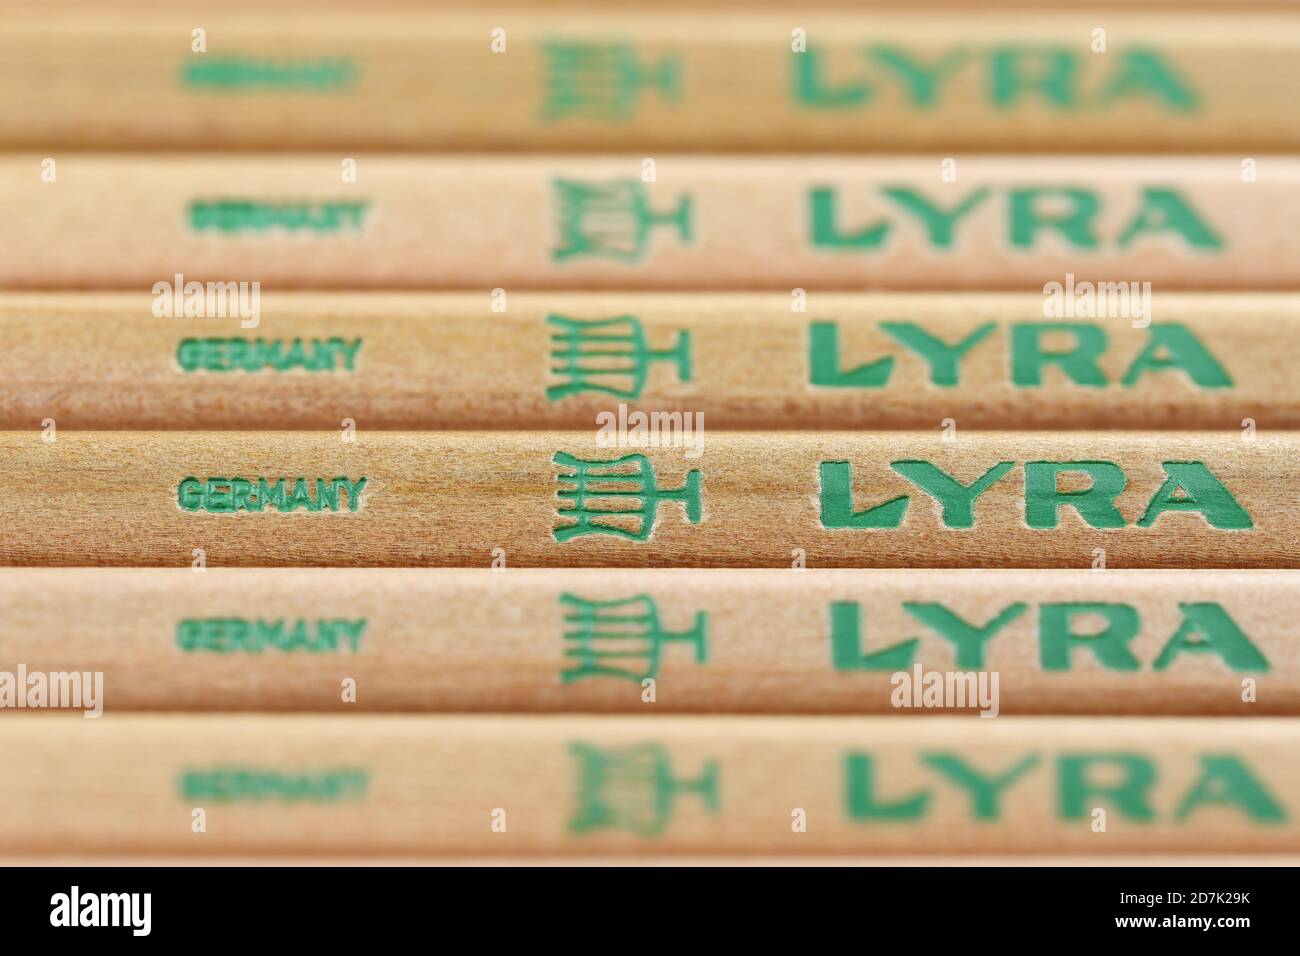 Lyra marking at pencils. Lyra is the oldest pencil factory in Nuremberg and has been part of the Italian FILA group since 2008. Stock Photo